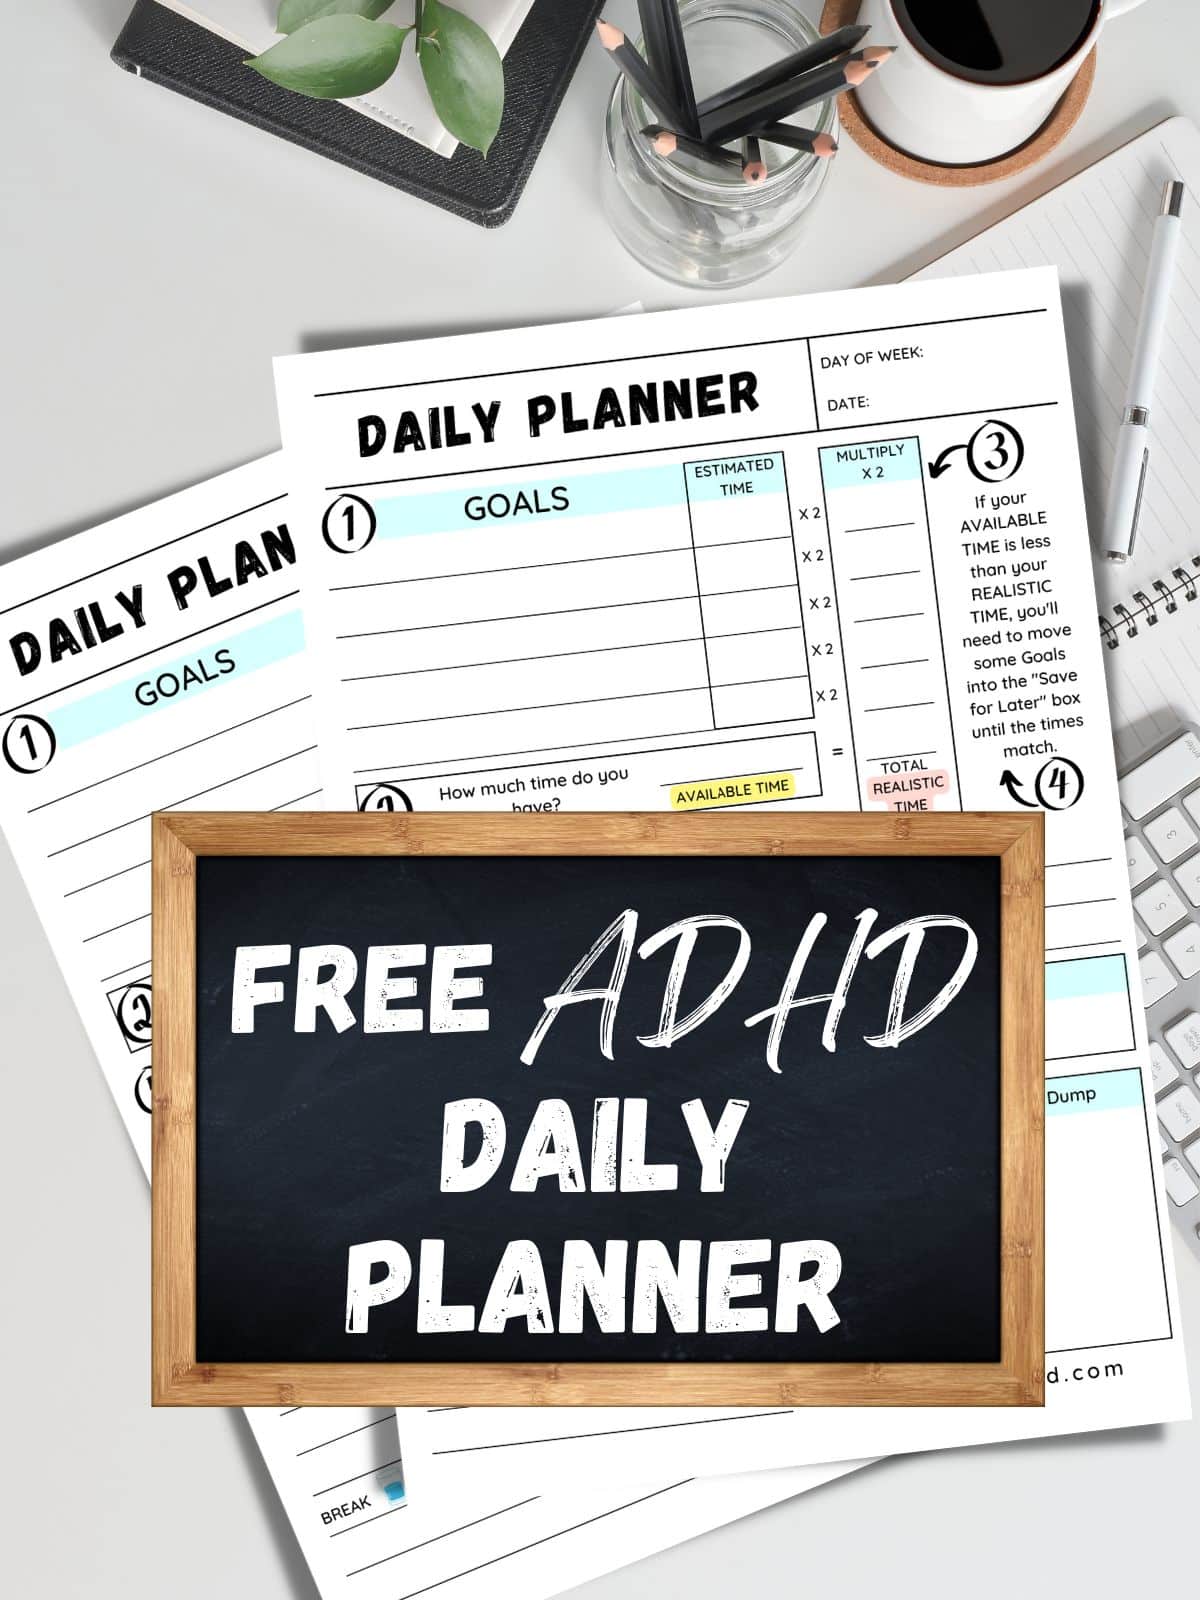 Two ADHD daily planner templates with the text overlay "free adhd daily planner."